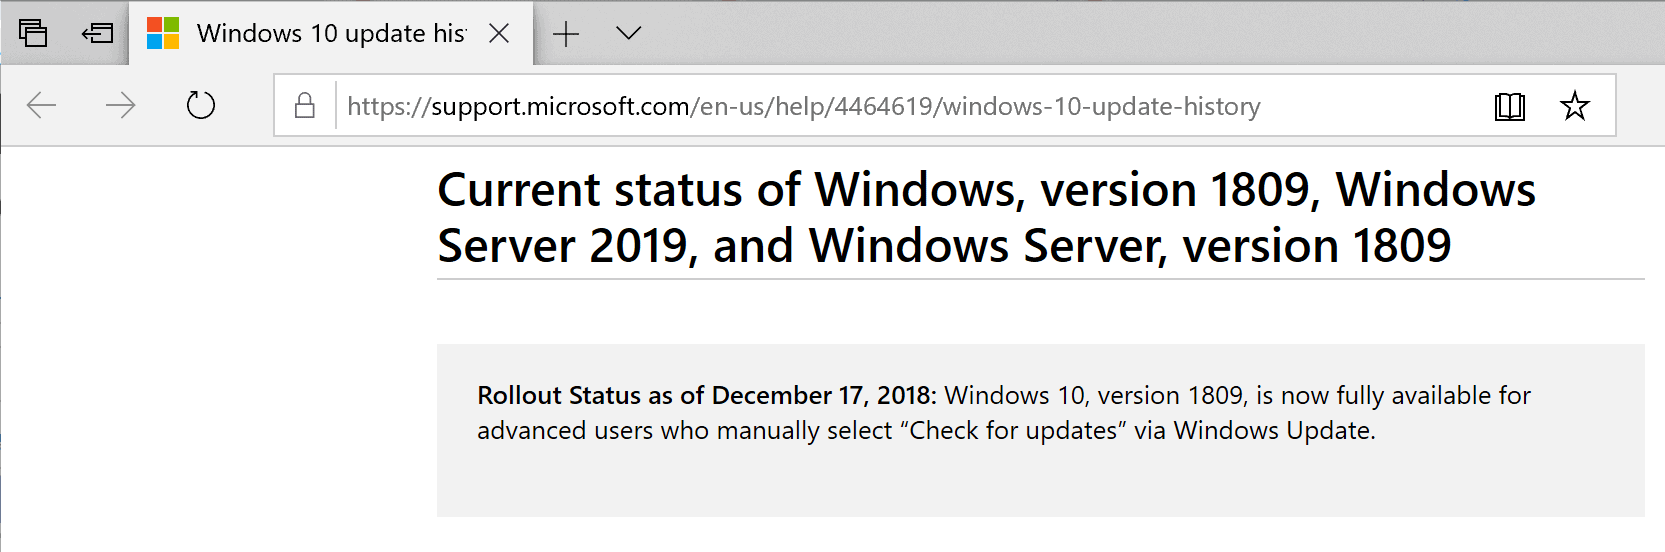 Windows 10 version 1809 available for 